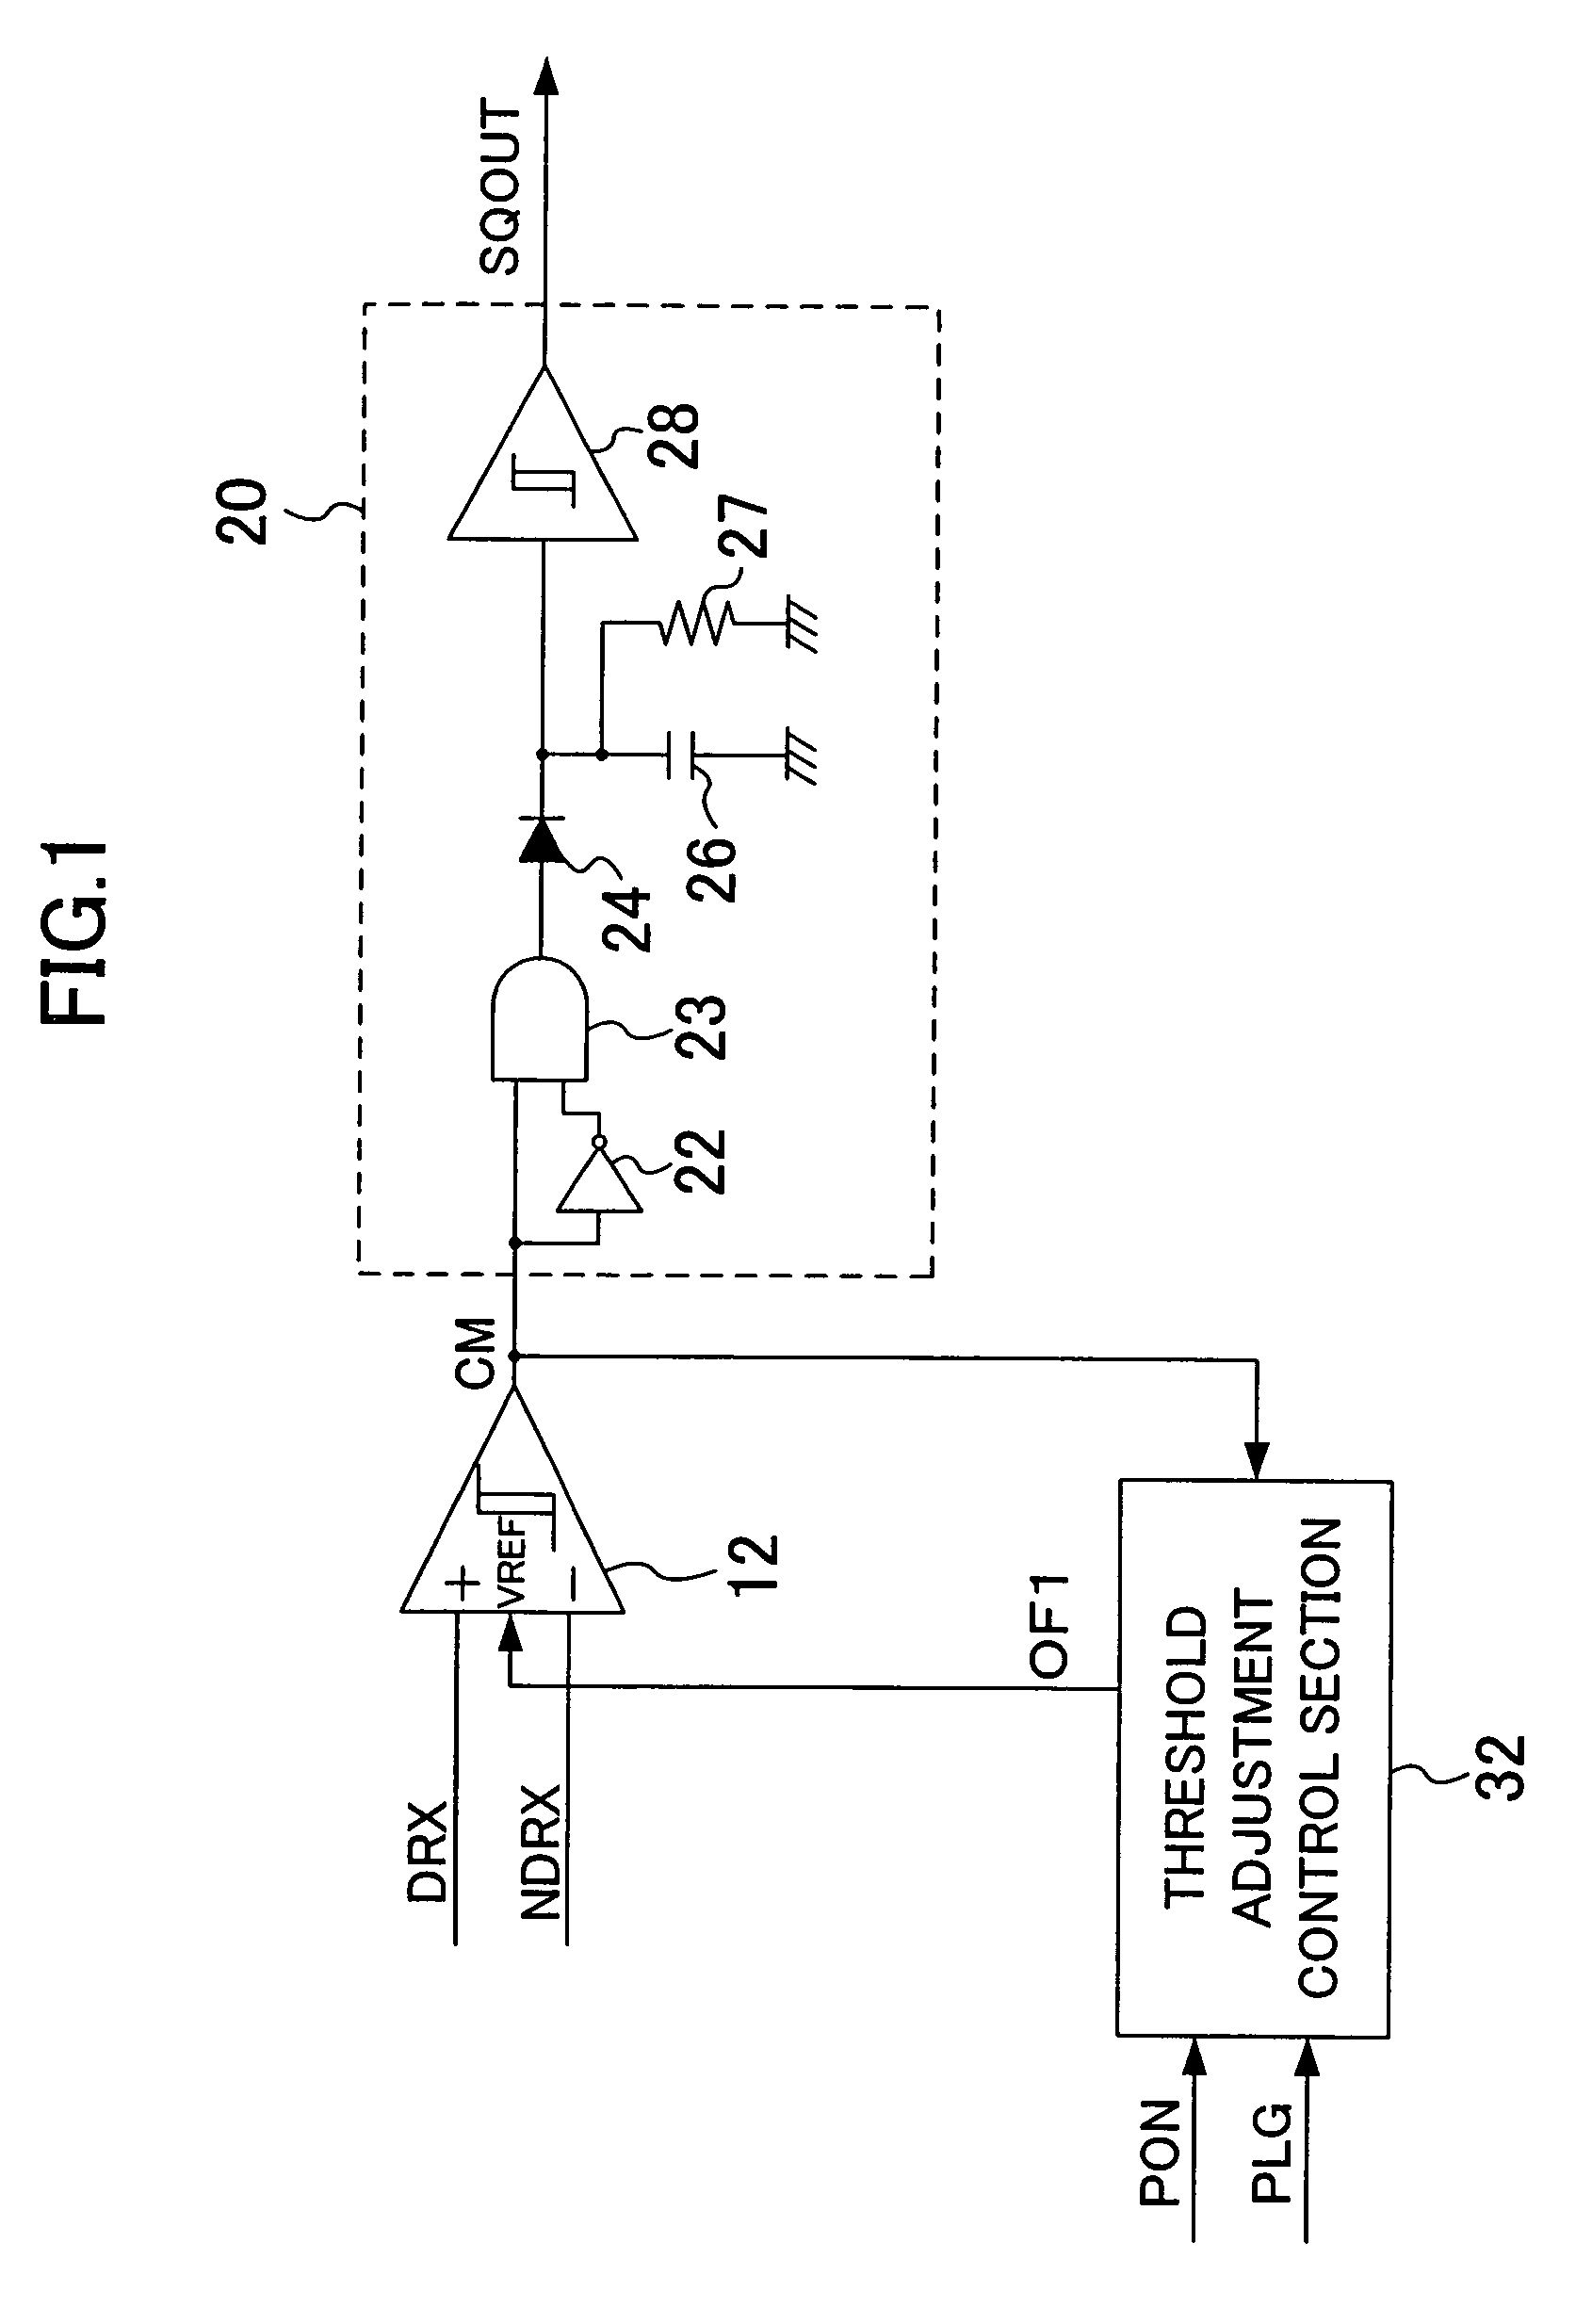 Signal detection circuit capable of automatically adjusting threshold value